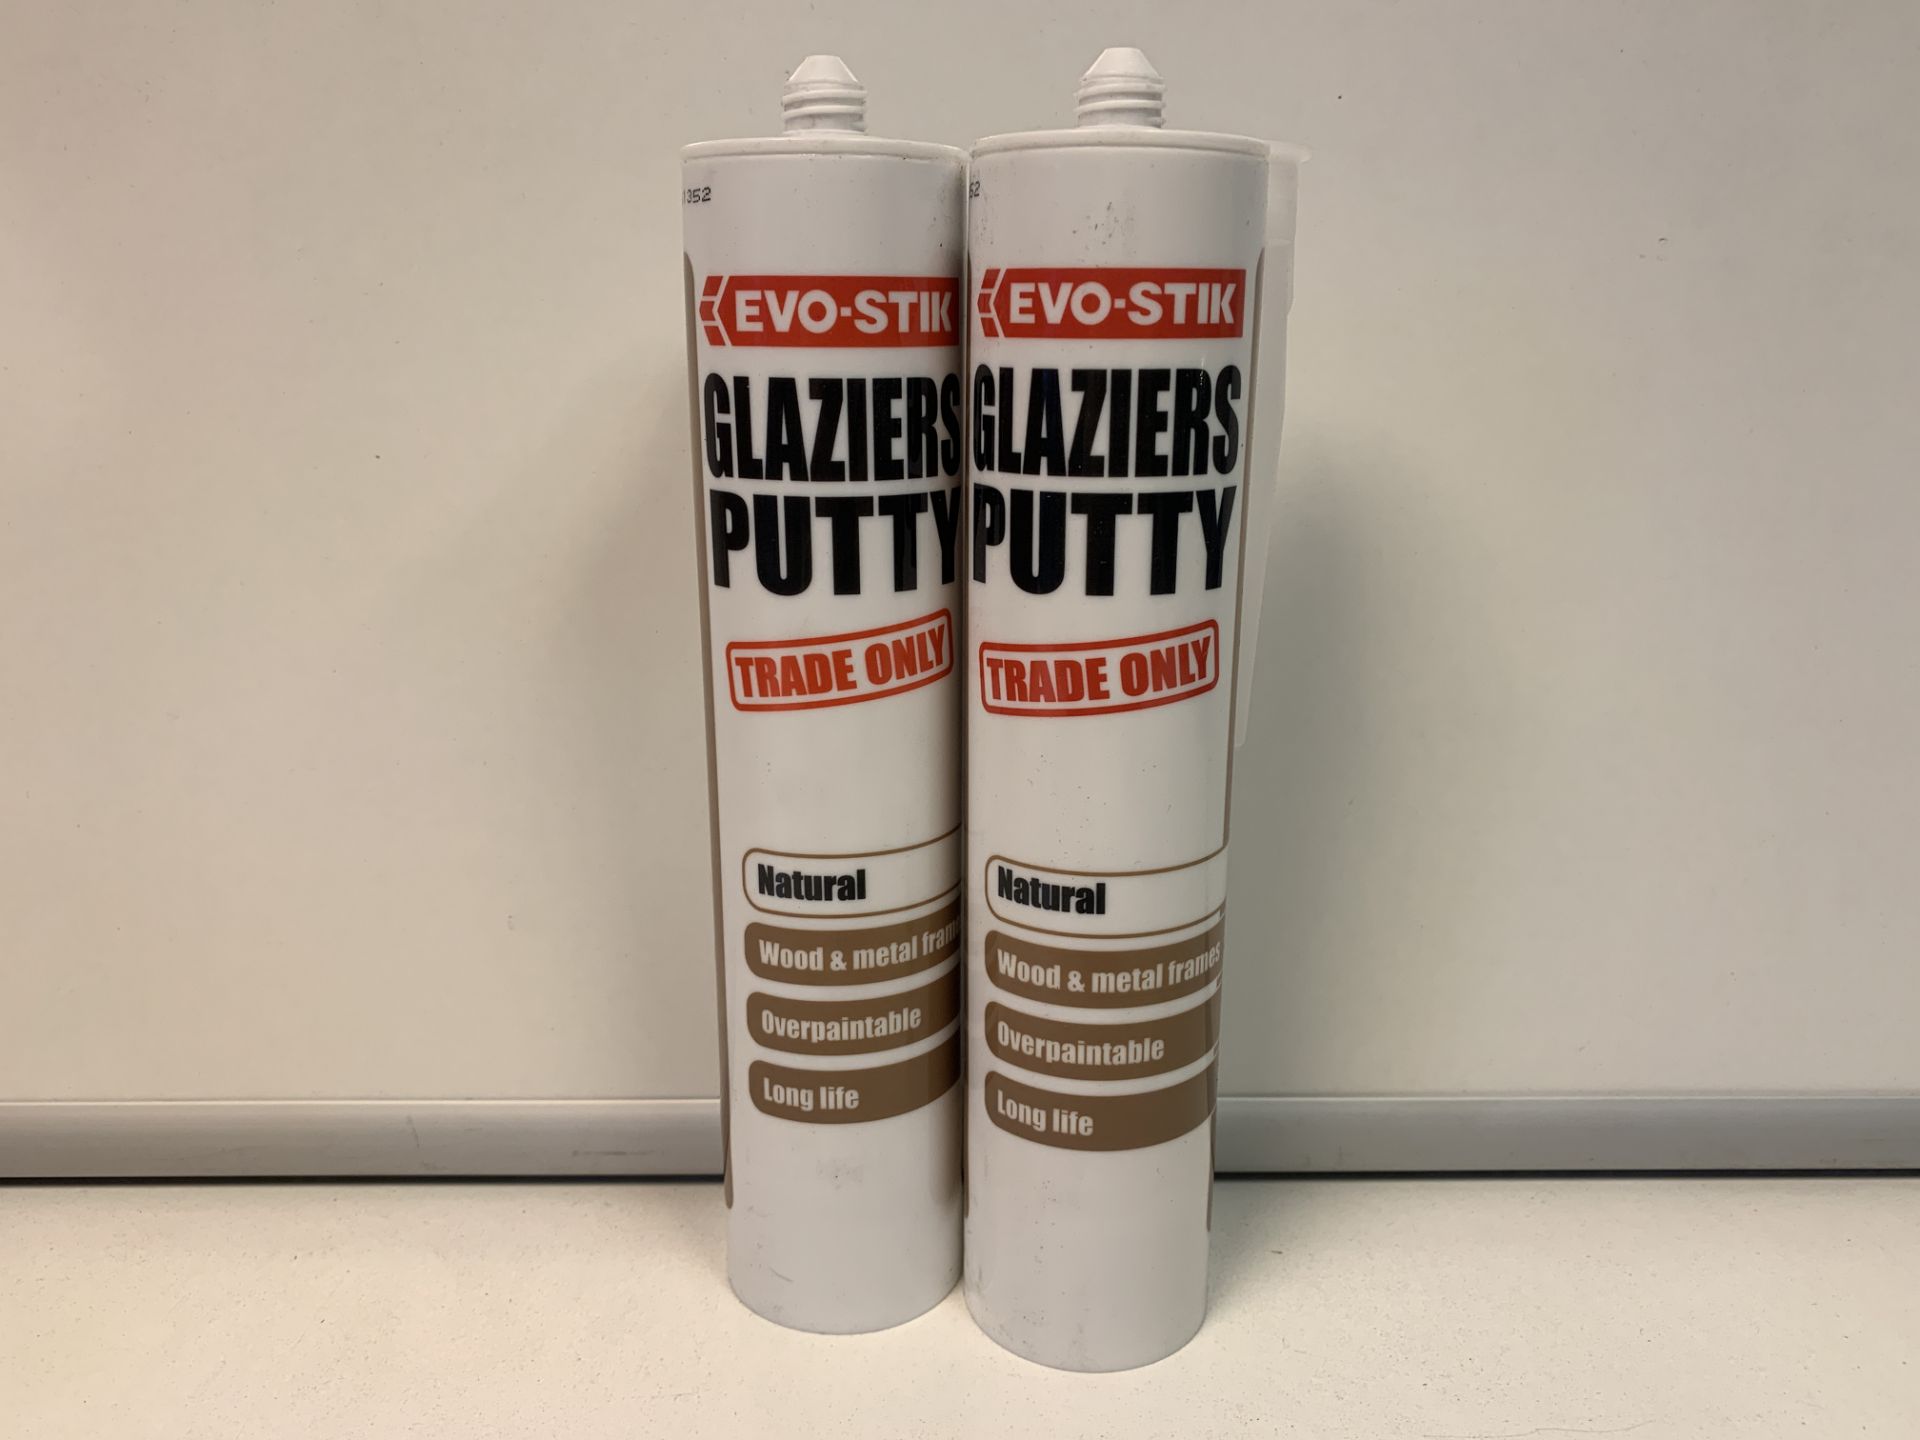 72 x NEW EVO-STIK GLAZIERS PUTTY - NATURAL. FOR WOOD & METAL FRAMES, OVER PAINTABLE, LONG LIFE. (